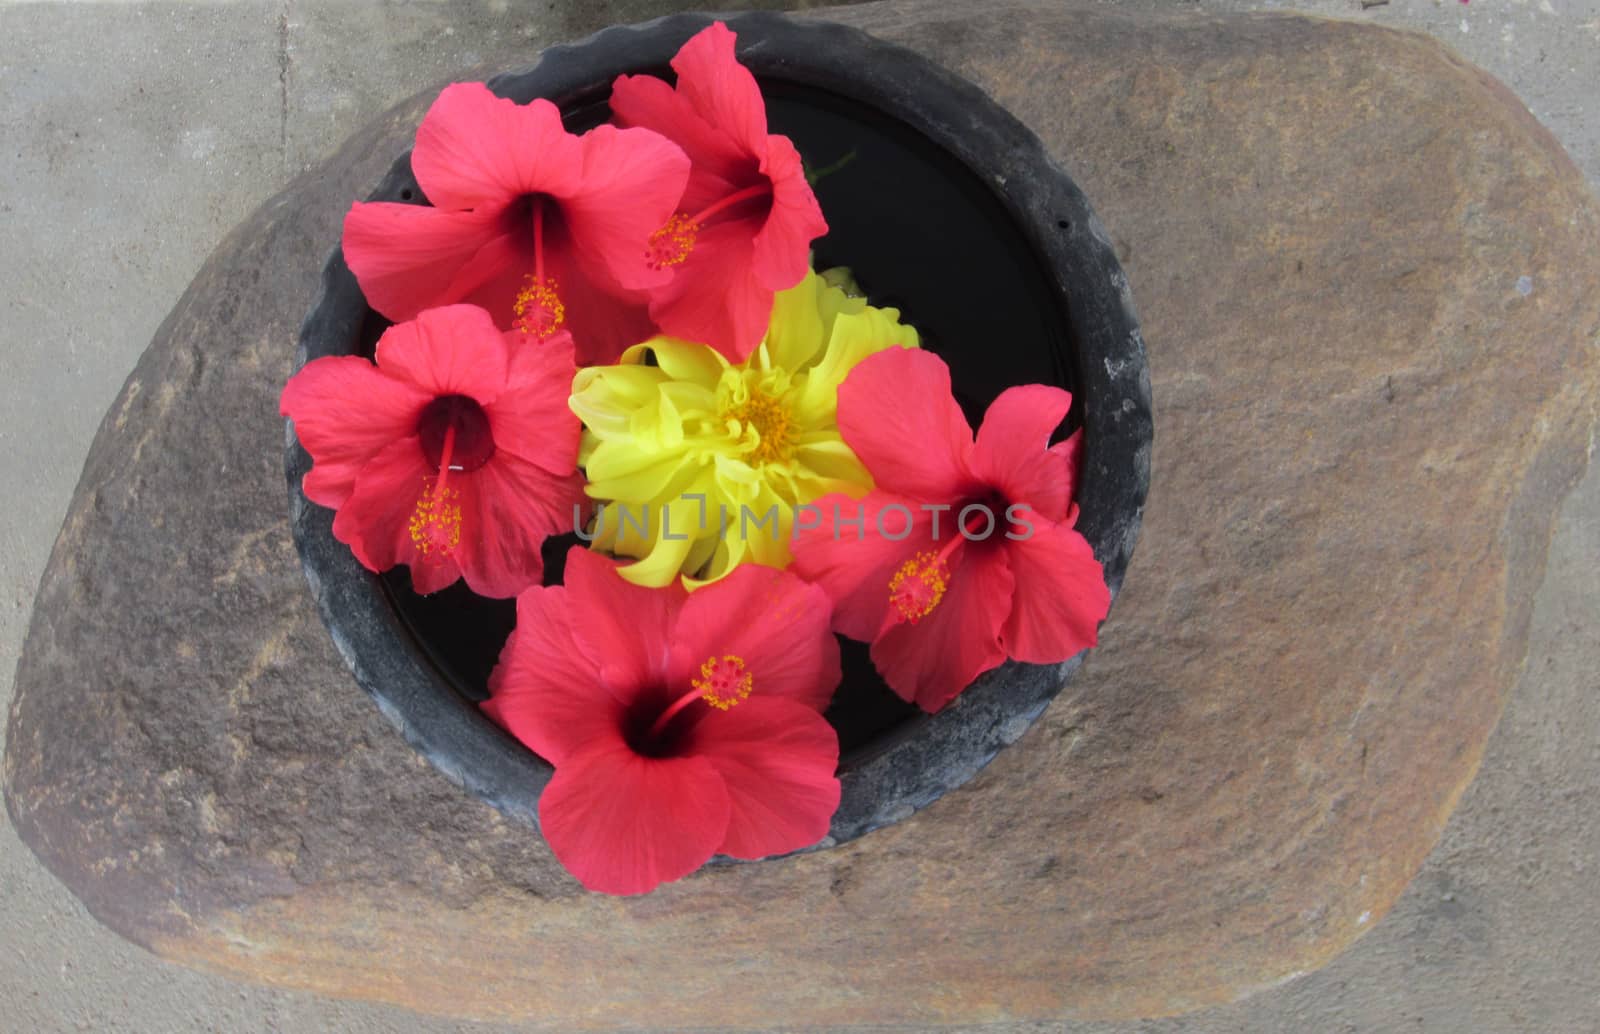 A yellow Coreopsis flower surrounded by red hibiscus in a bowl sitting on a big stone.